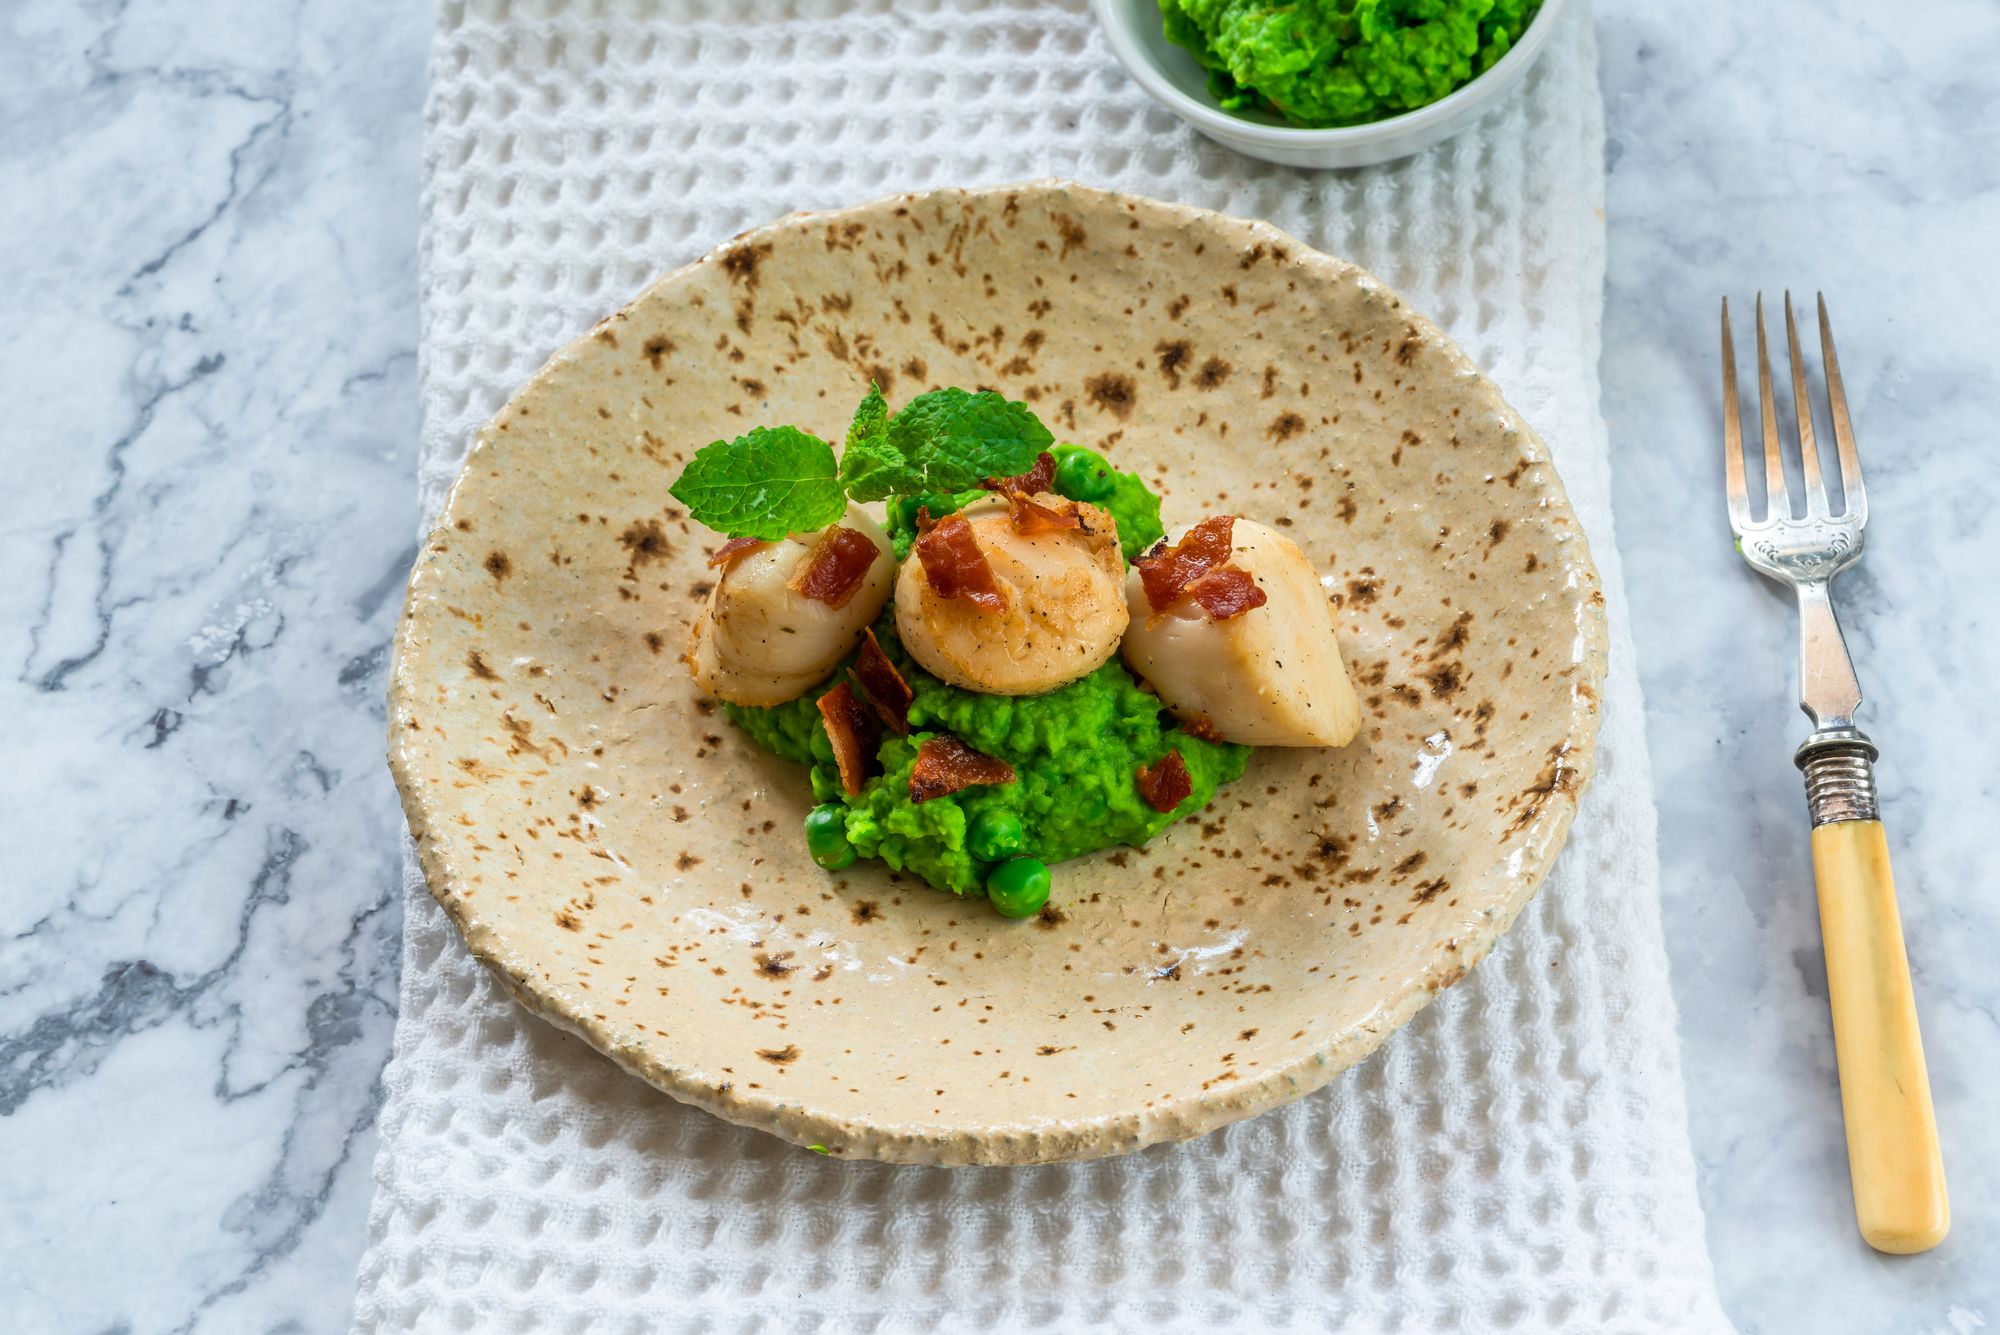 Seared Scallops with Minted Peas